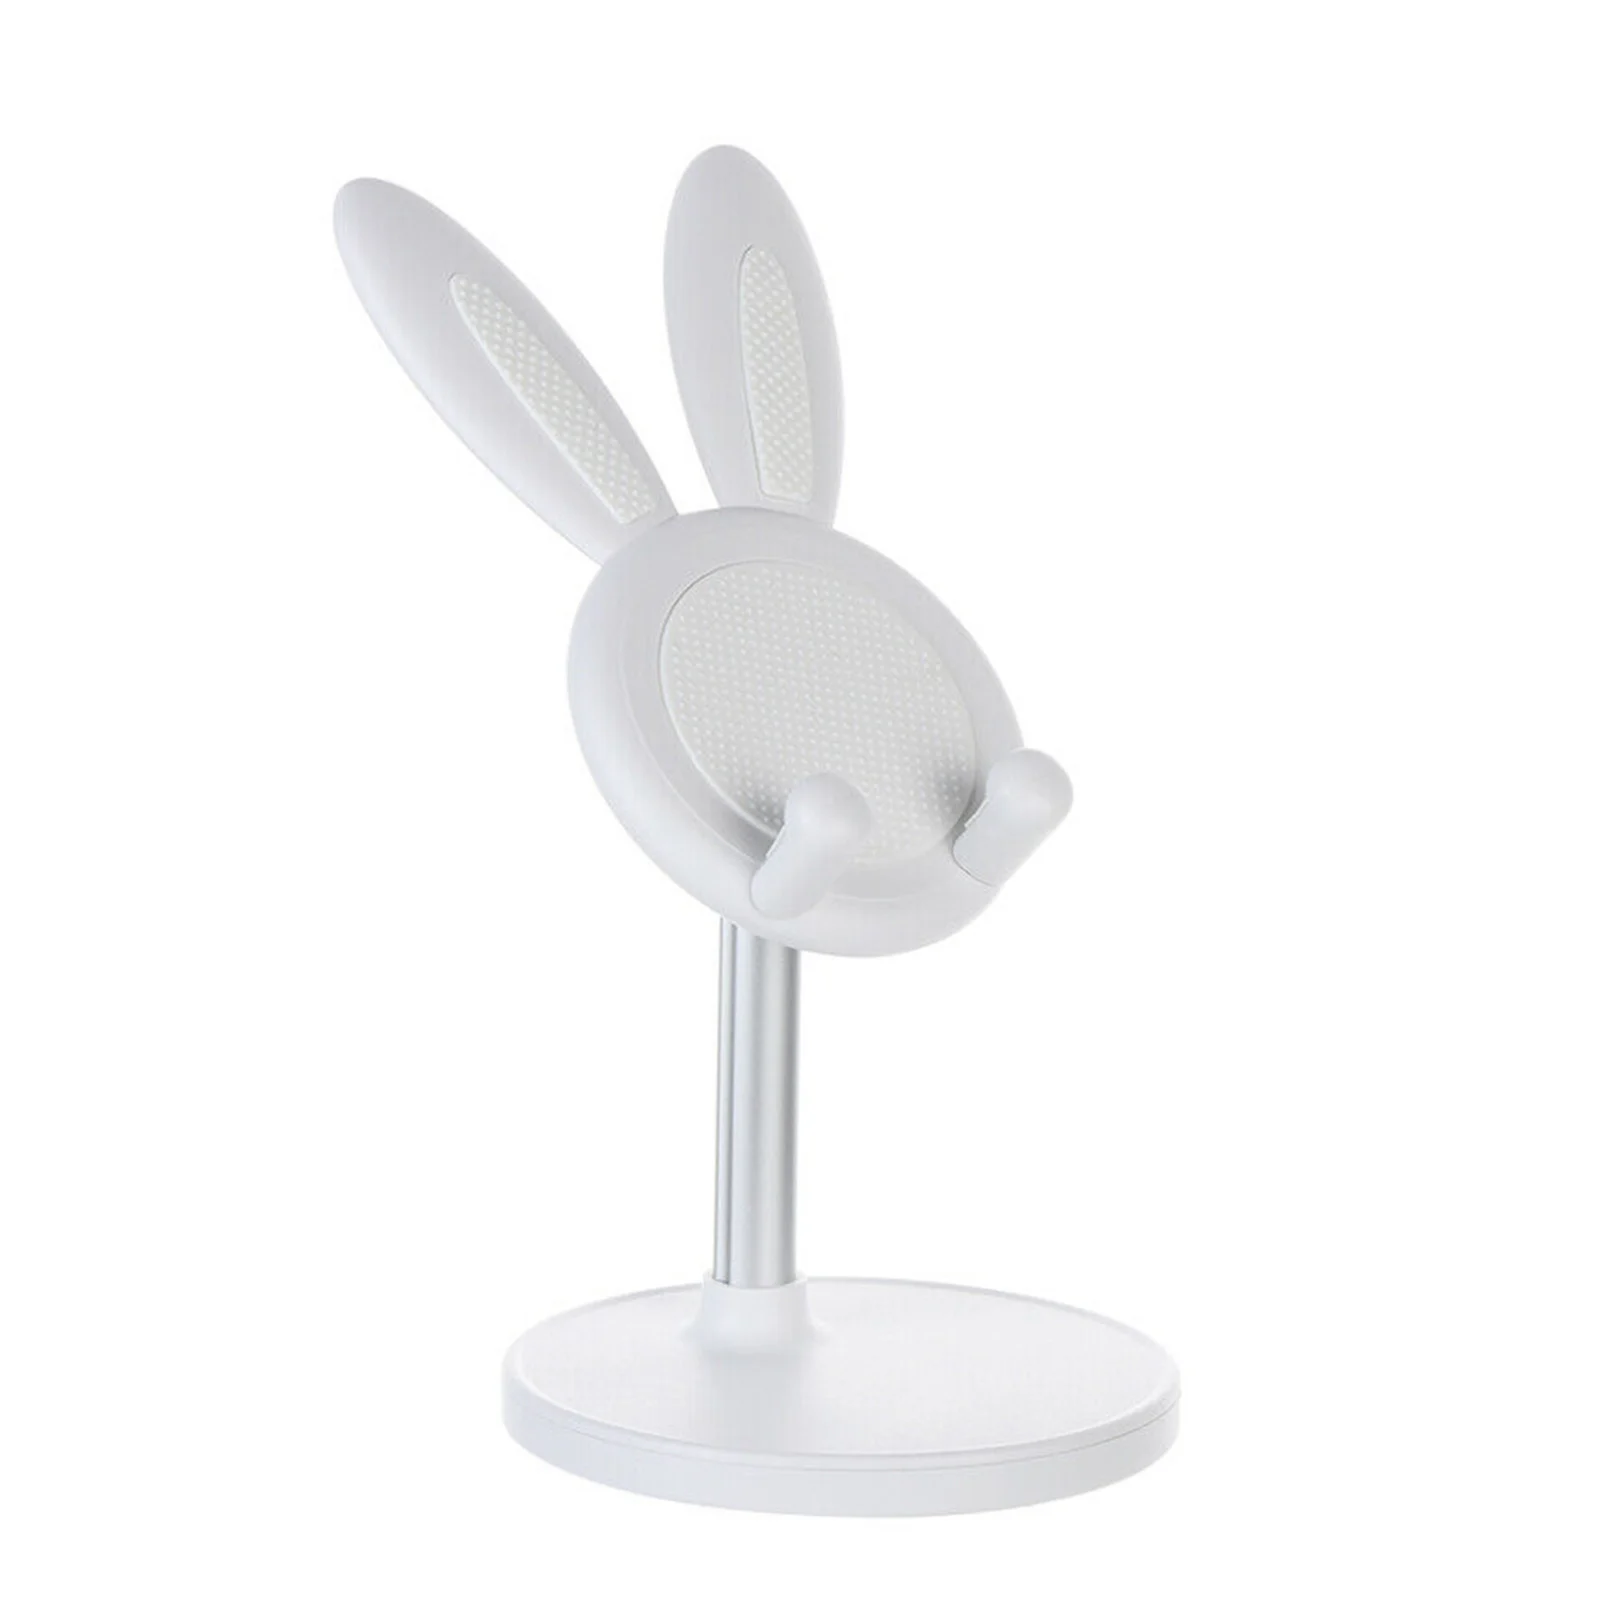 cute bunny phone metal holder desktop cell phone stand height angle adjustable for iphone ipad tablet foldable extend support free global shipping